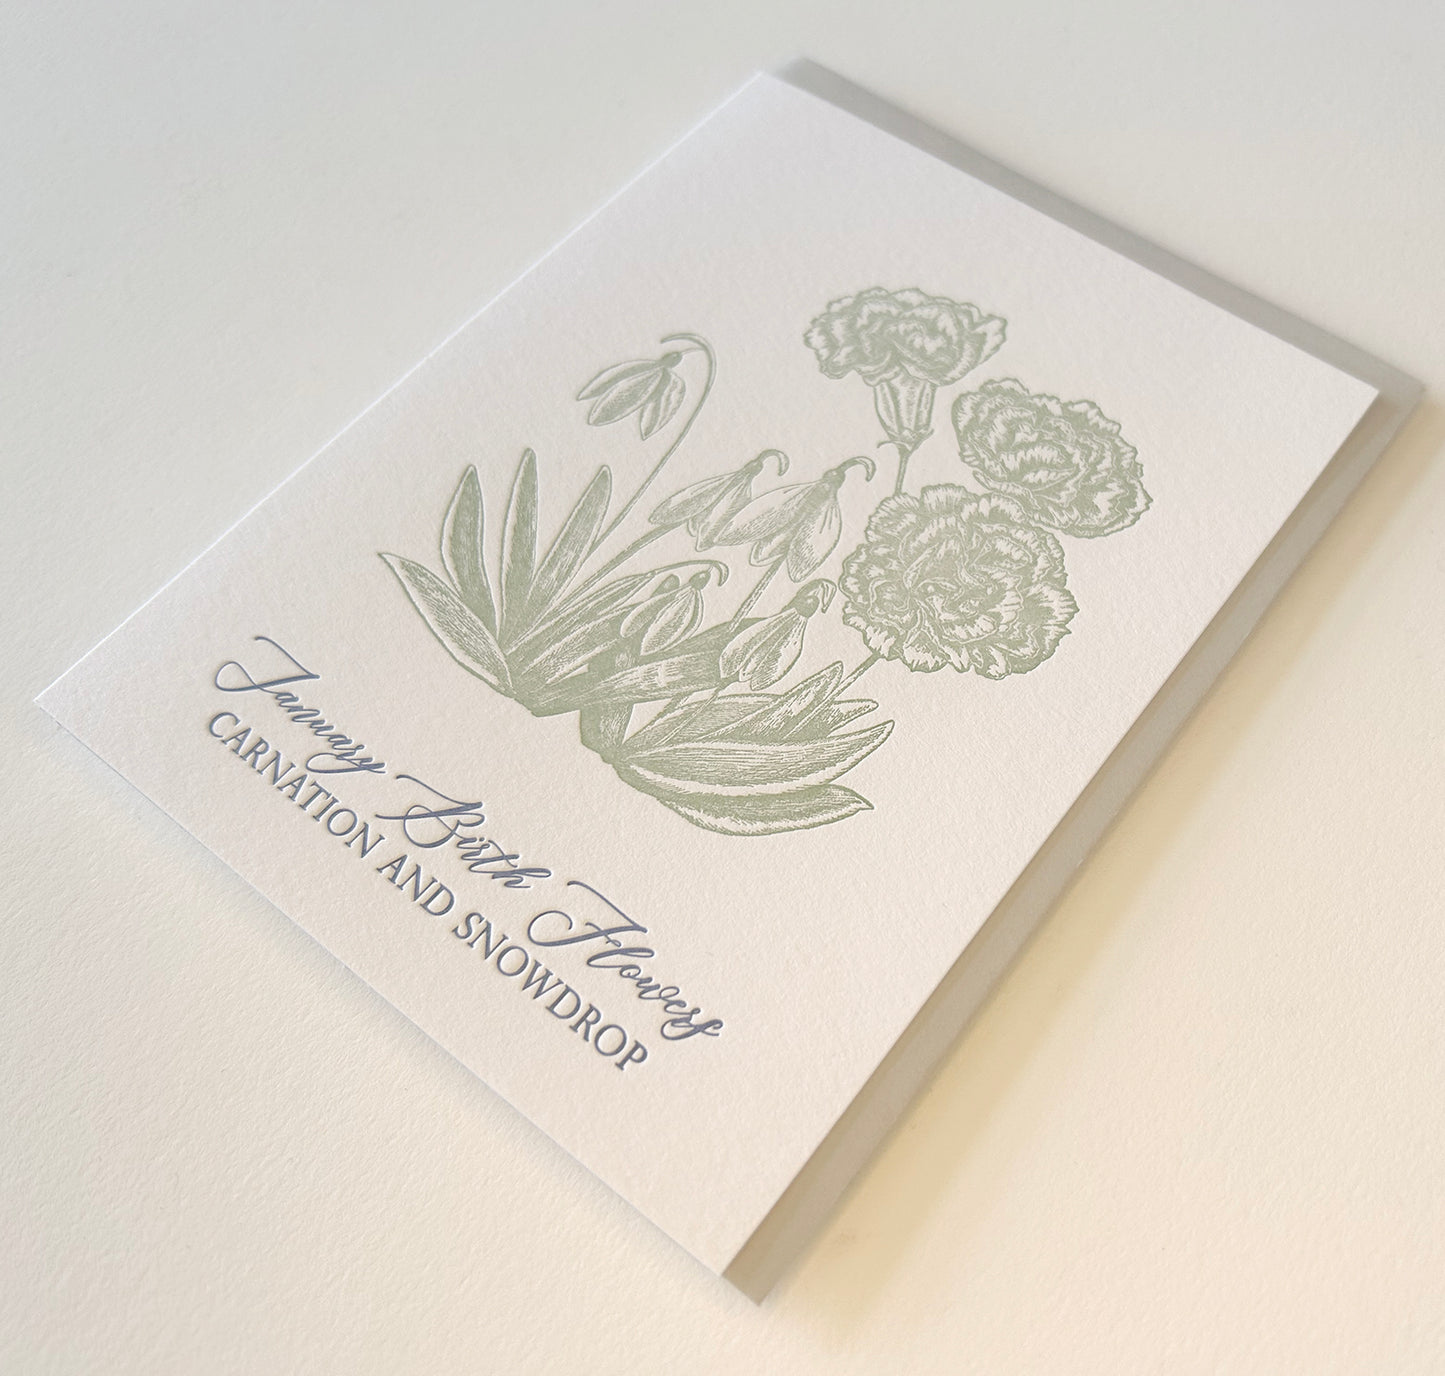 Letterpress birthday card with florals that says "January birth flowers carnation and snowdrop" by Rust Belt Love